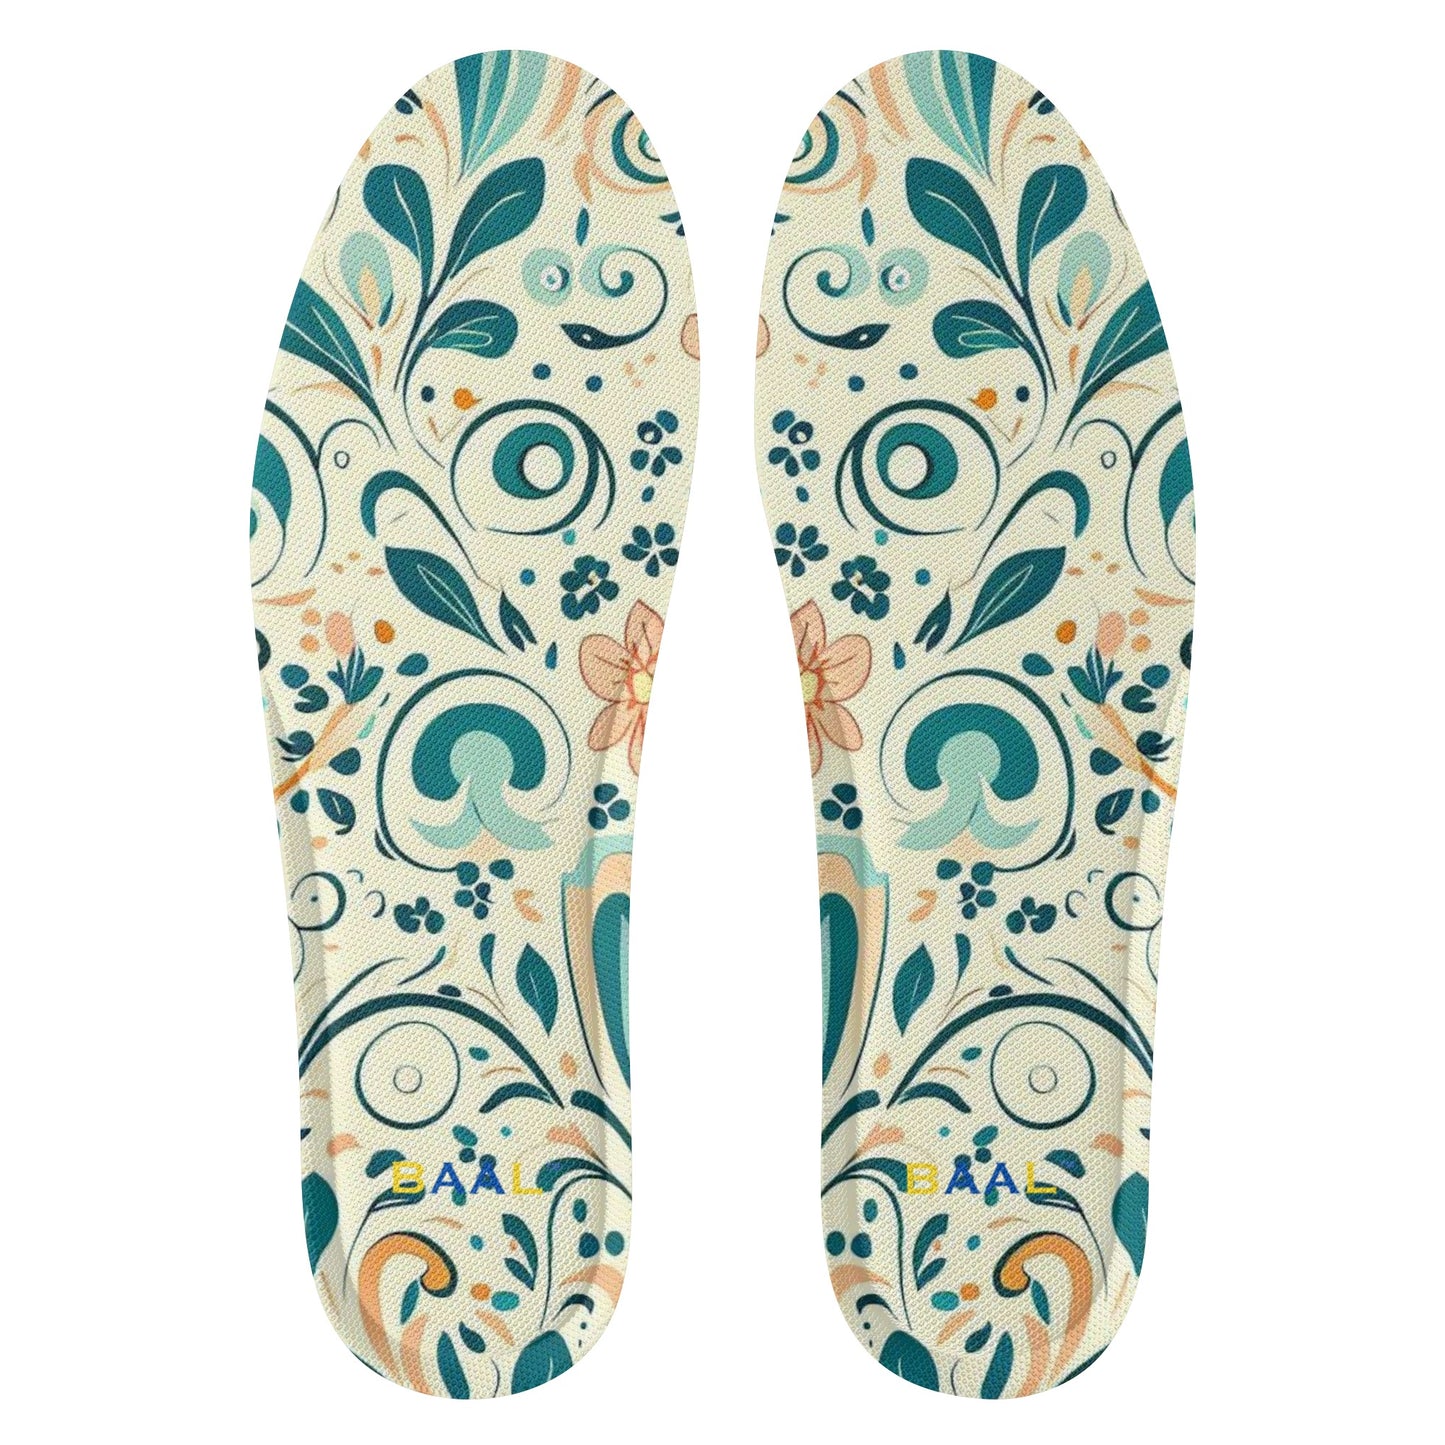 Comfortable Insole: Padded Insole for All-Day Comfort